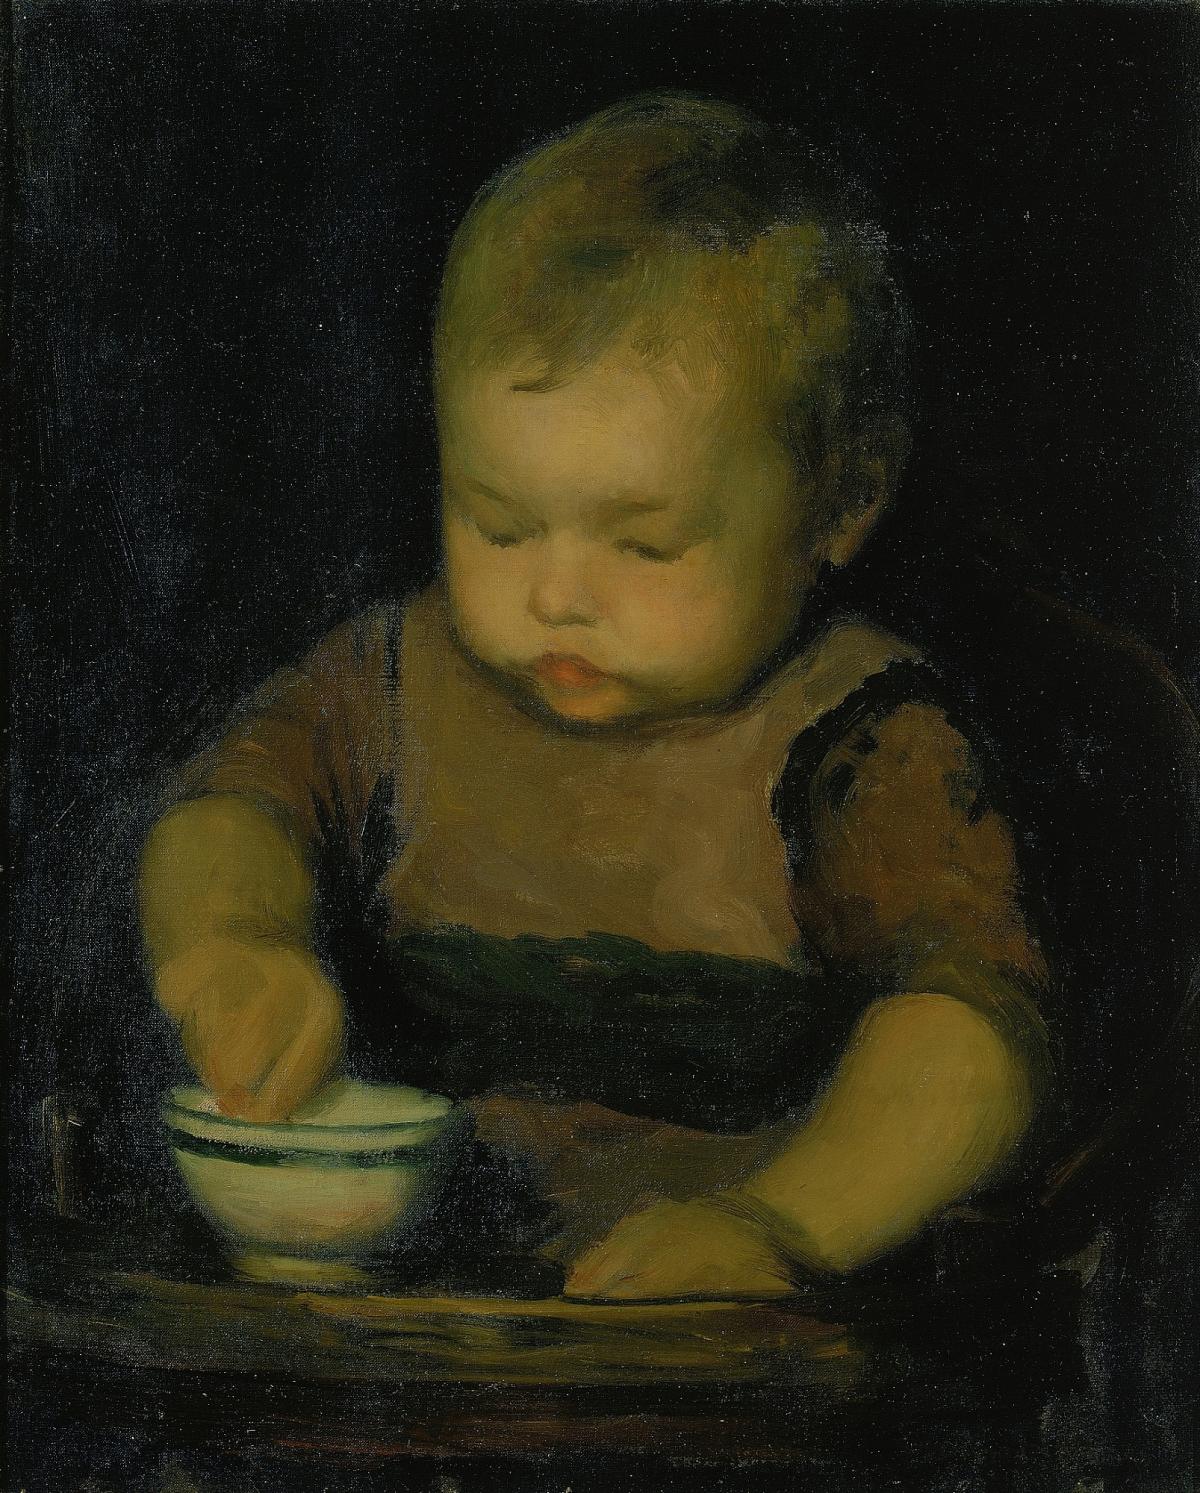 An oil painting of a baby with his hand in a bowl.